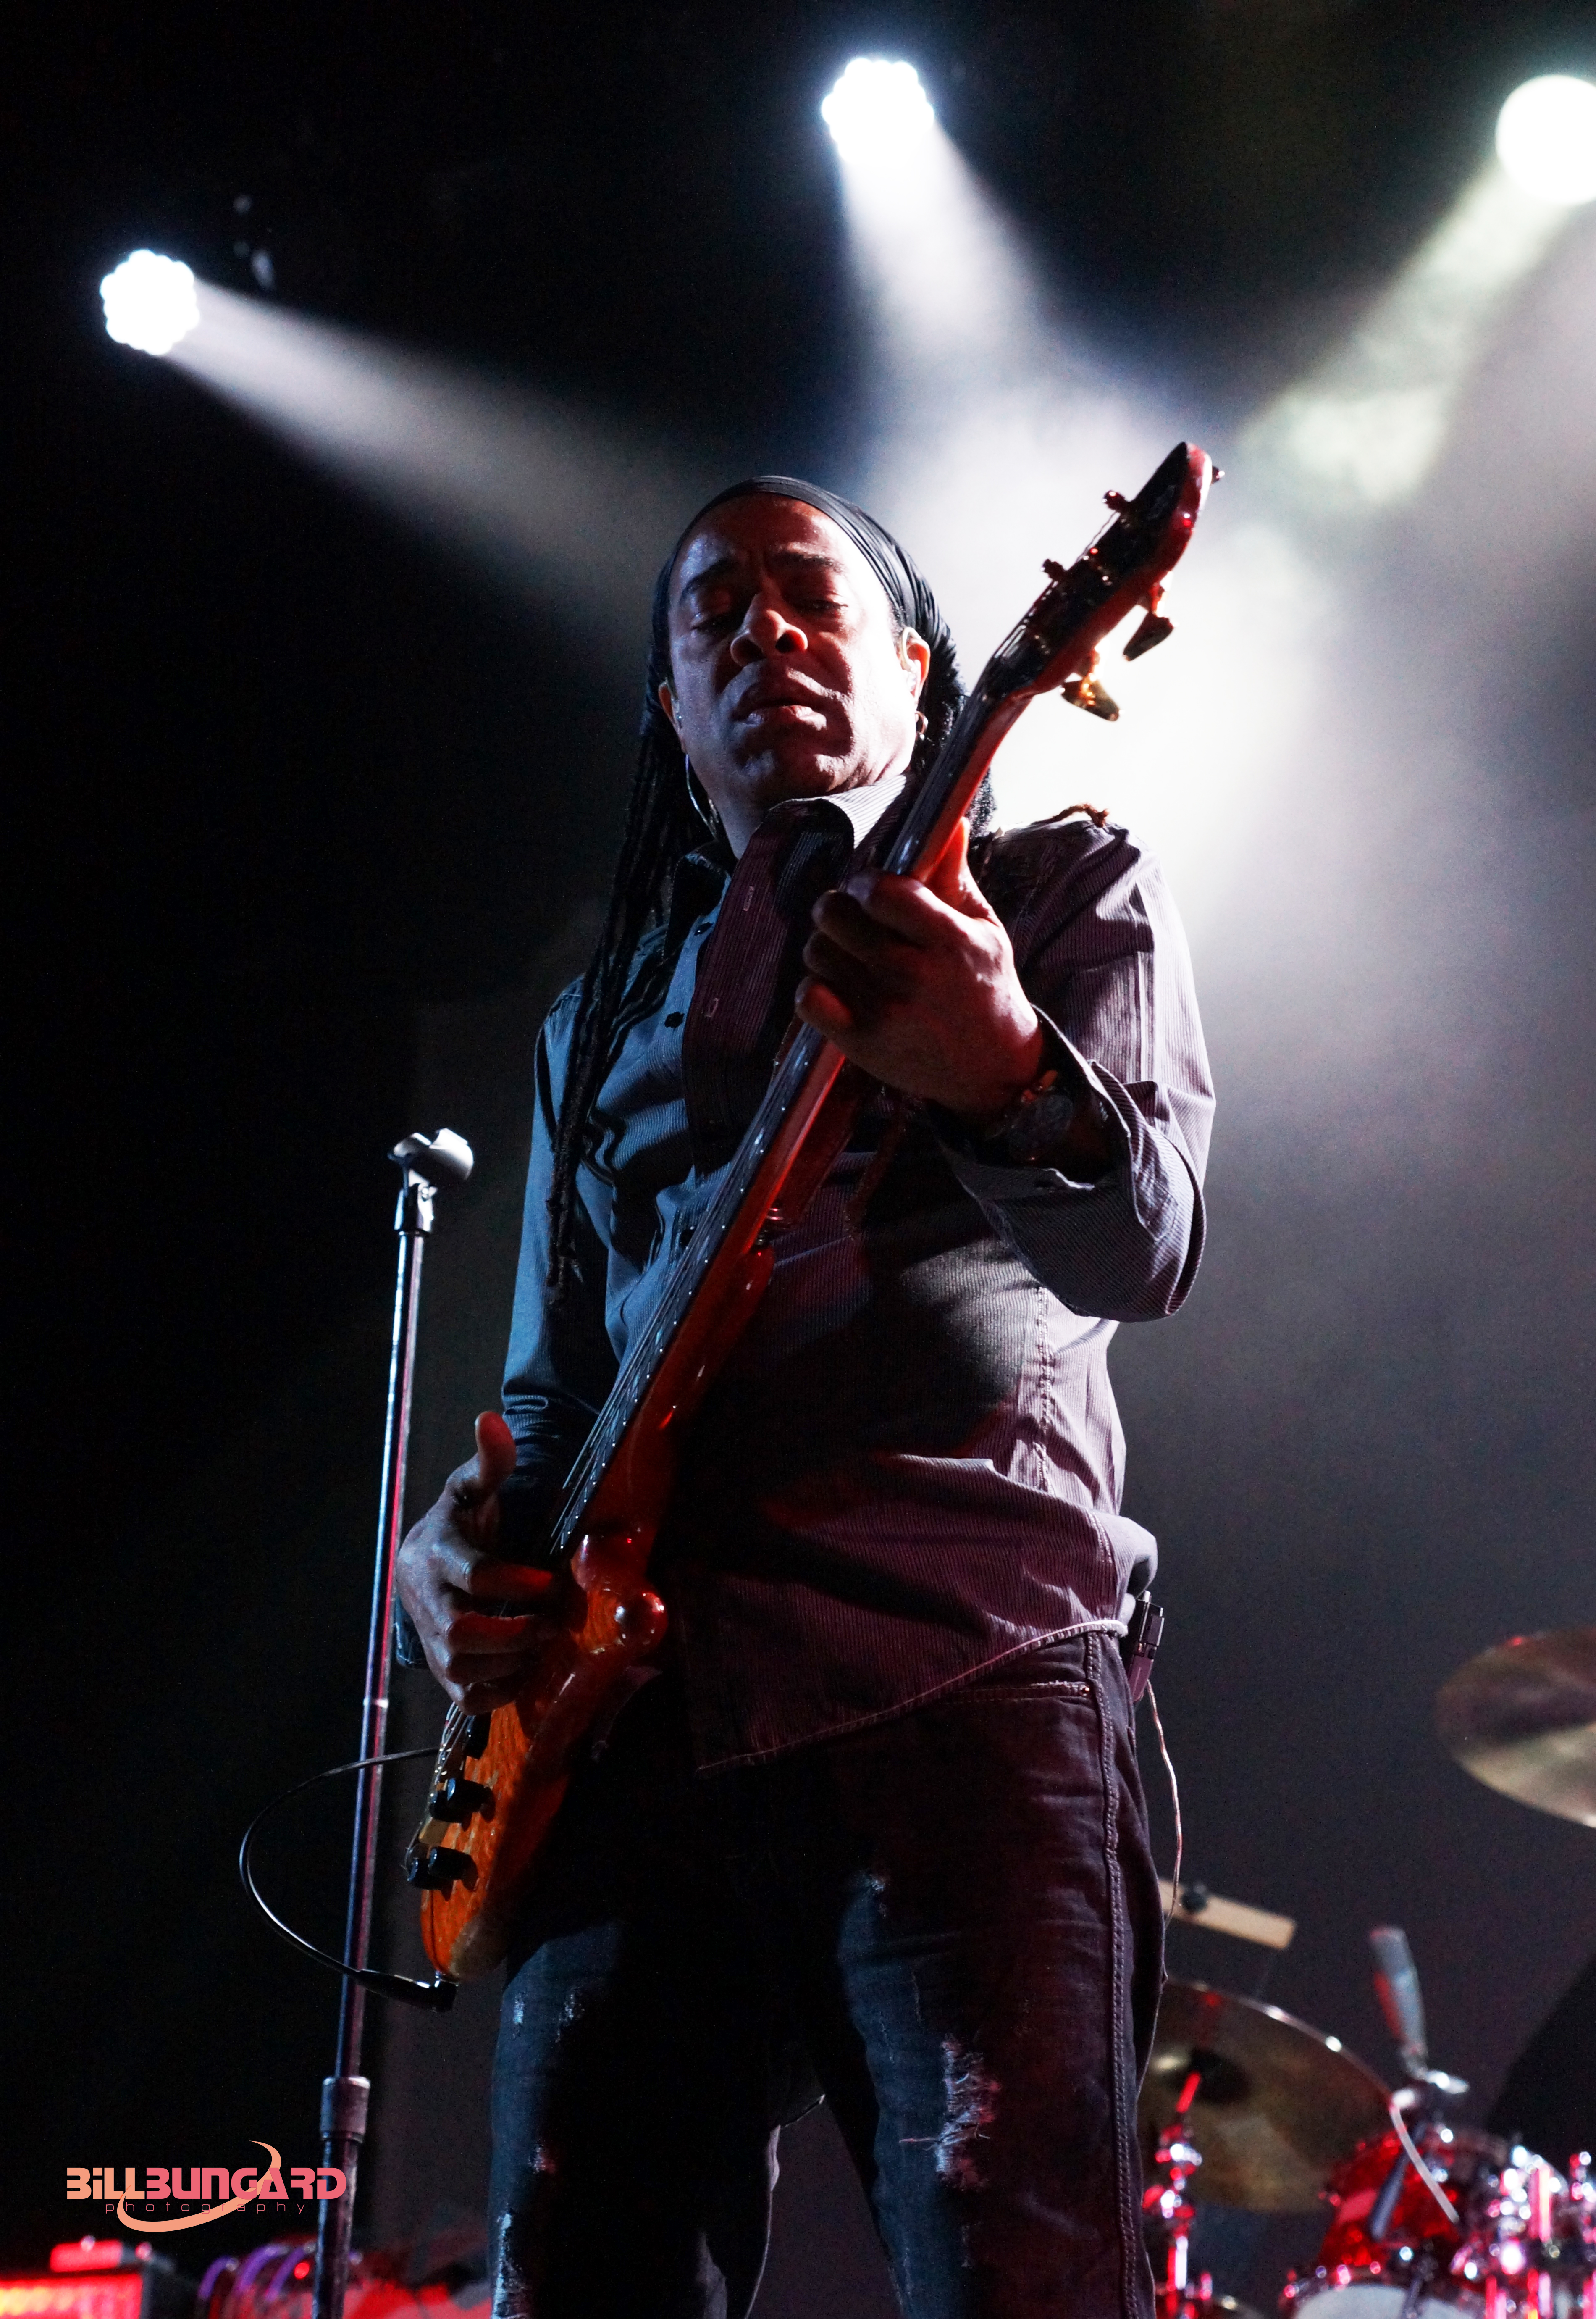 Living Colour @ The Paramount (Photo By Bill Bungard)